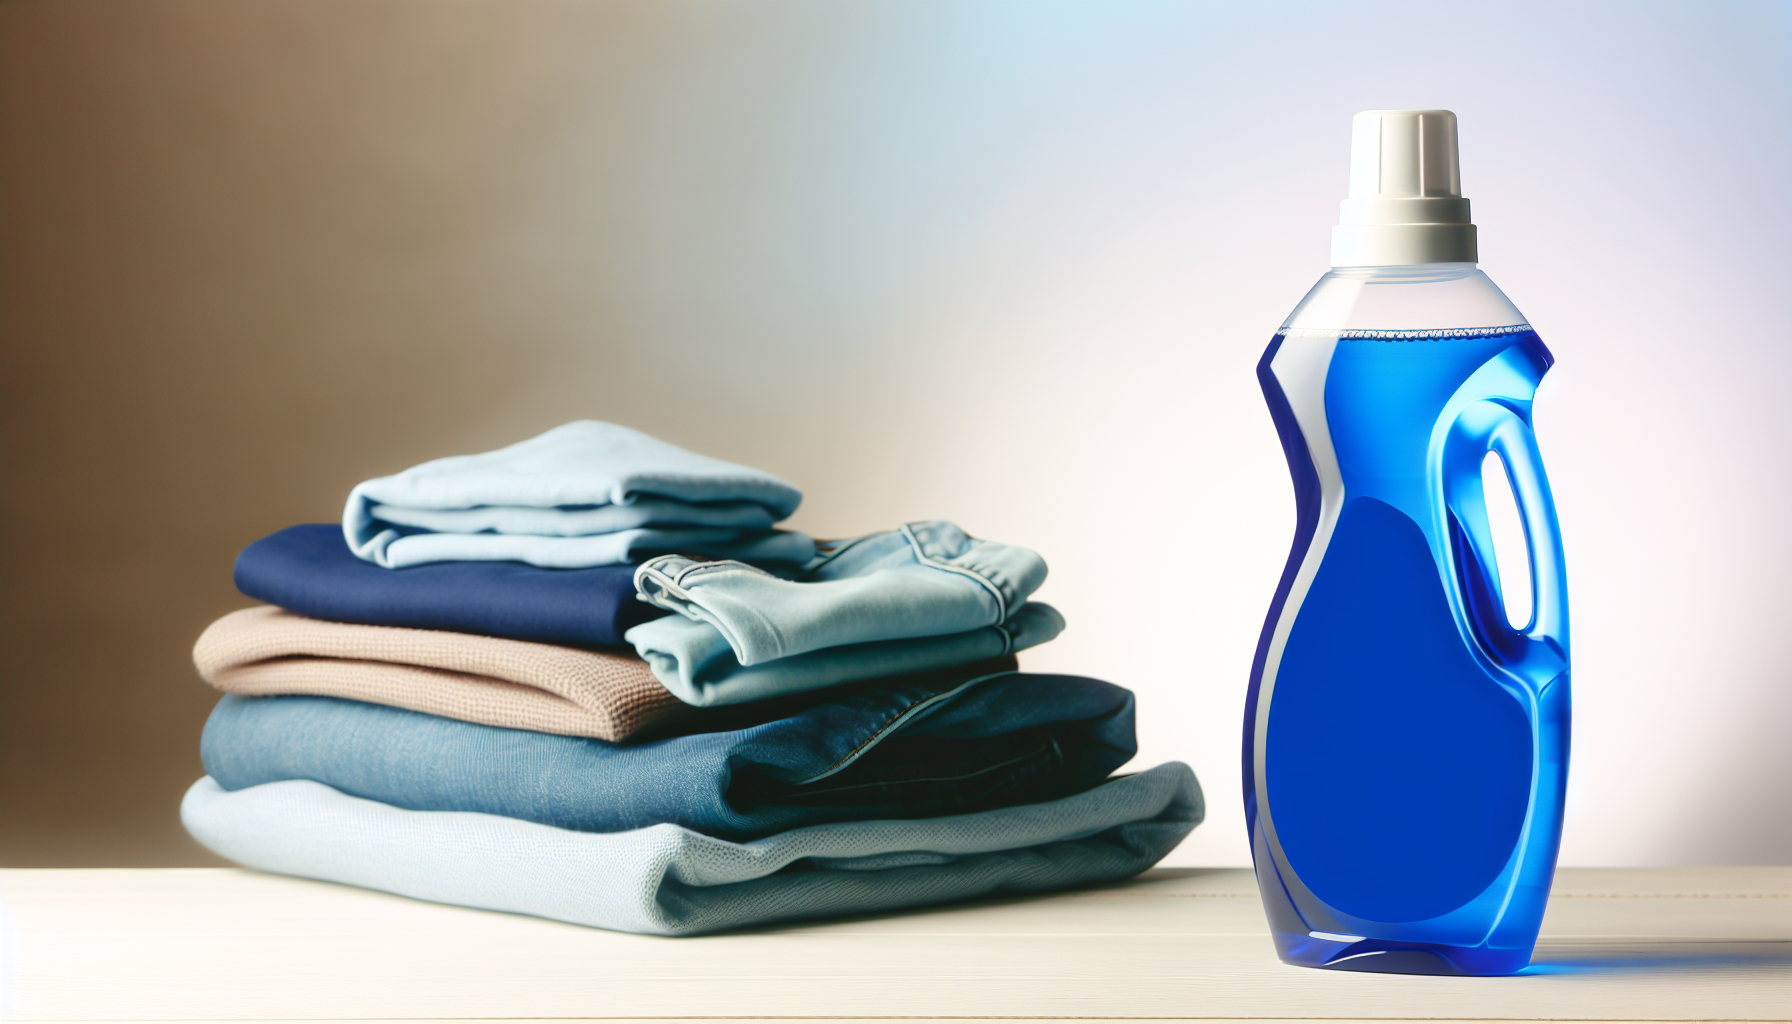 Laundry detergent and soft water for laundry